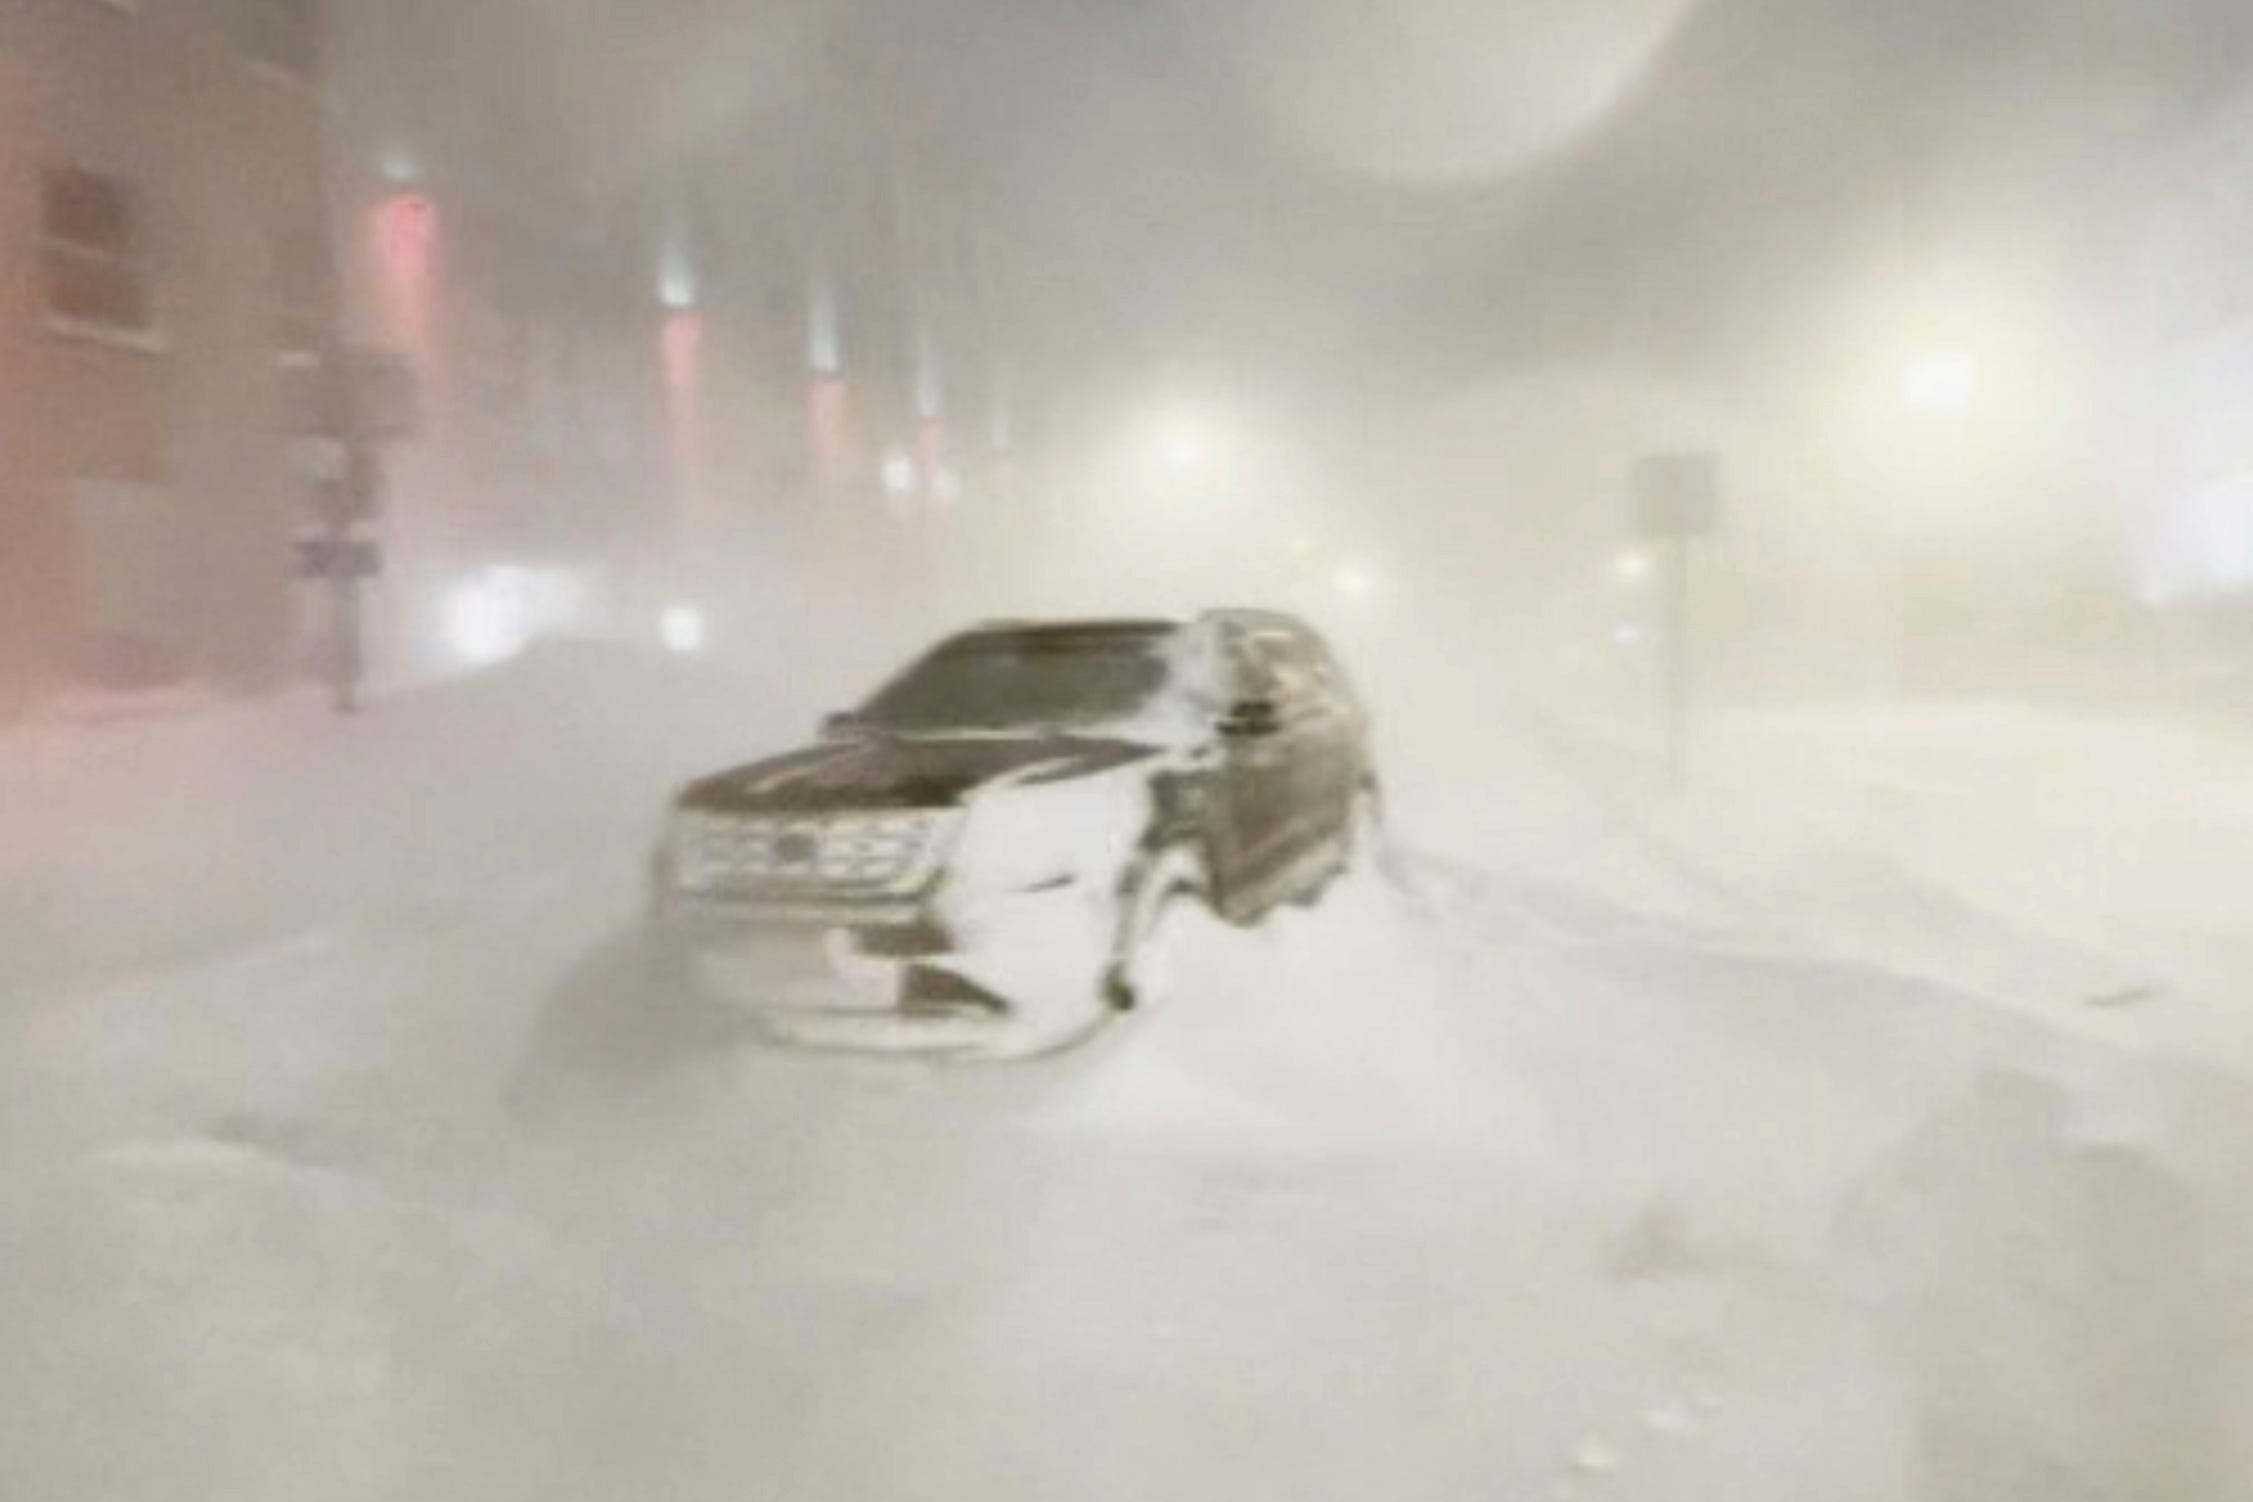 A vehicle covered in snow in Buffalo, N.Y. on early Sunday, Dec. 25, 2022.